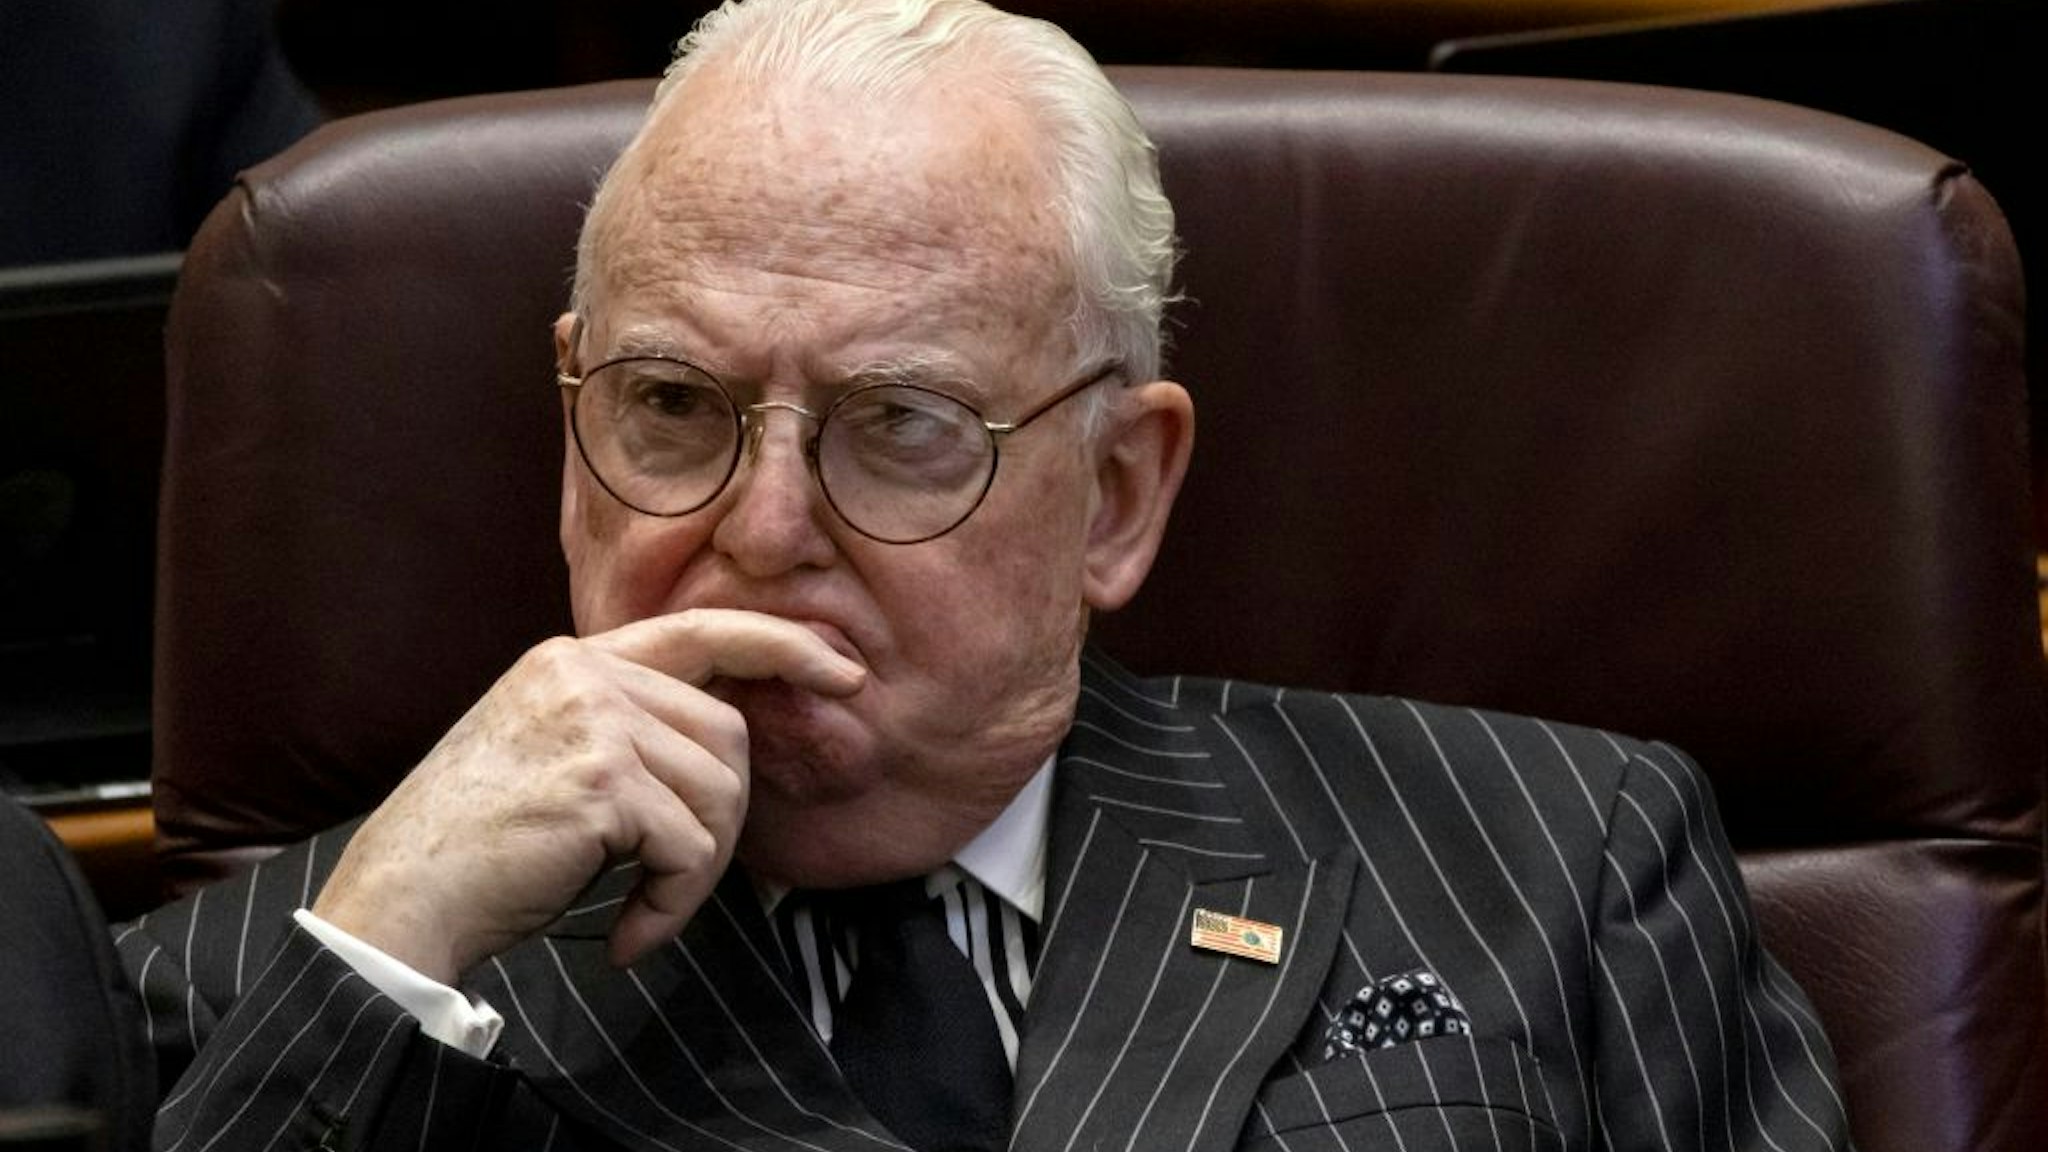 Then-Ald. Ed Burke listens during a City Council meeting, March 15, 2023, at Chicago City Hall.